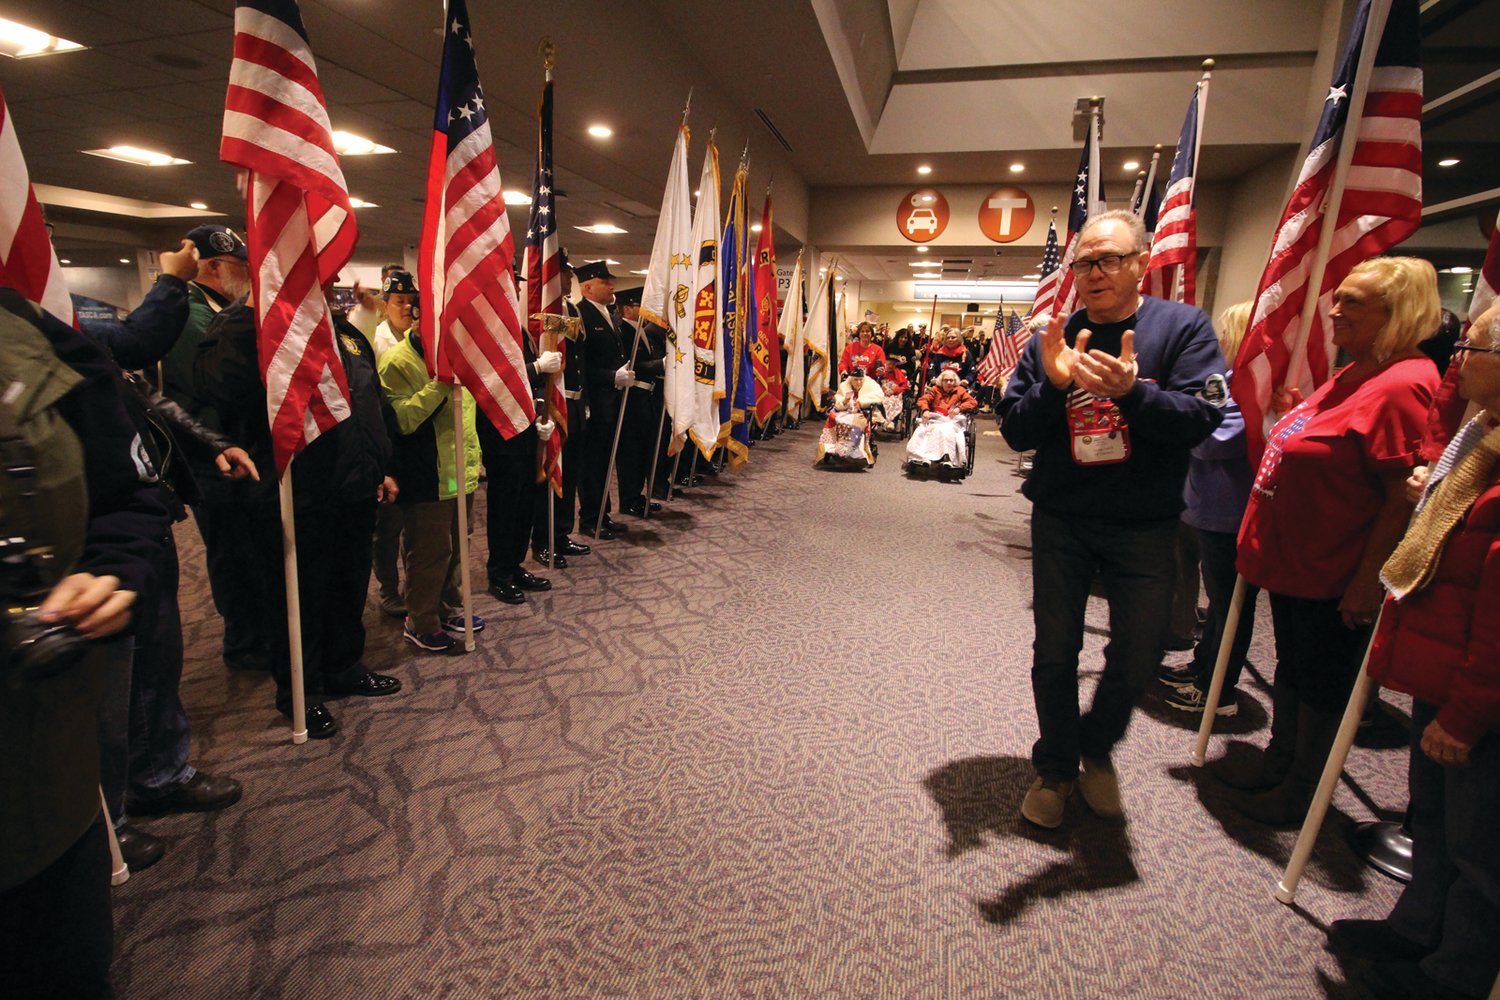 CHEERING THEM ON: George Farrell leads the way as members of the all women veterans flight held April 6, 2019 enter the terminal at Green Airport.